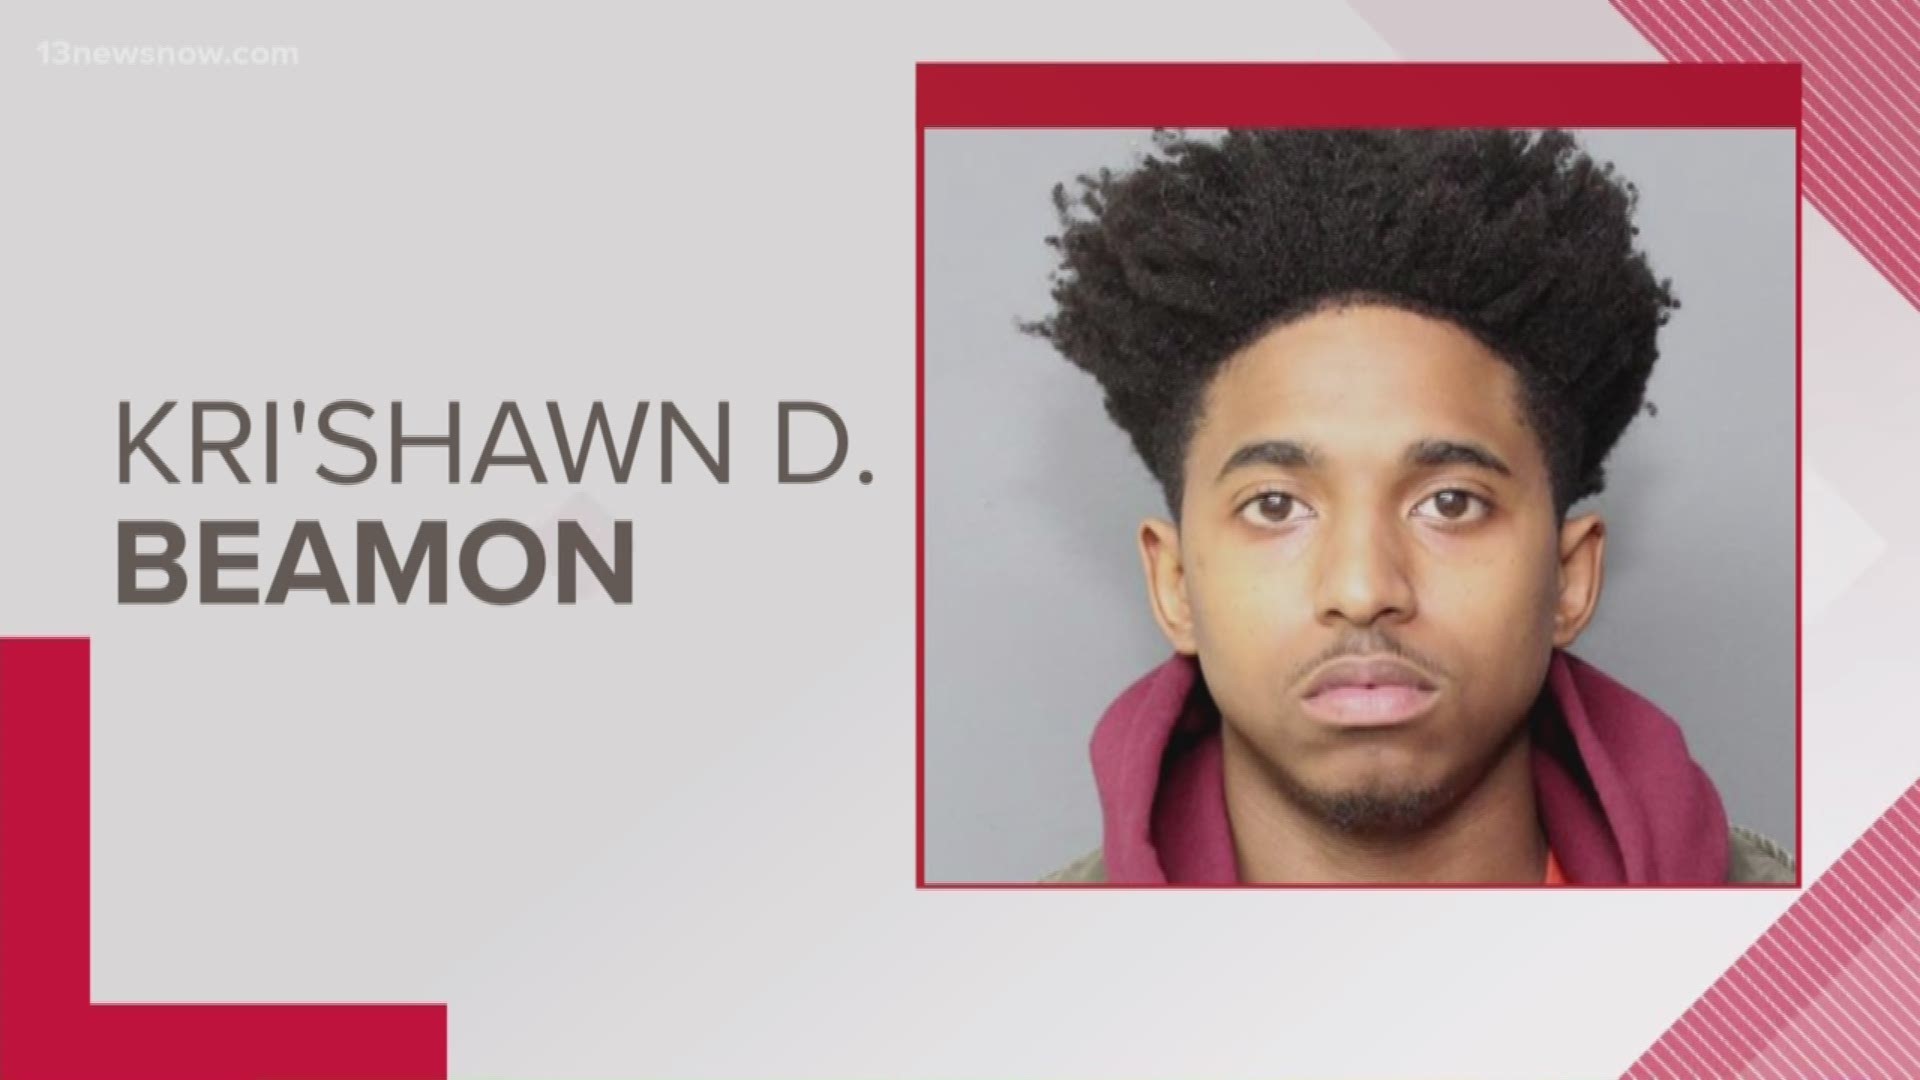 Police have arrested Kri'Shawn D. Beamon in connection with the shooting death of William & Mary football running back Nathan Evans.